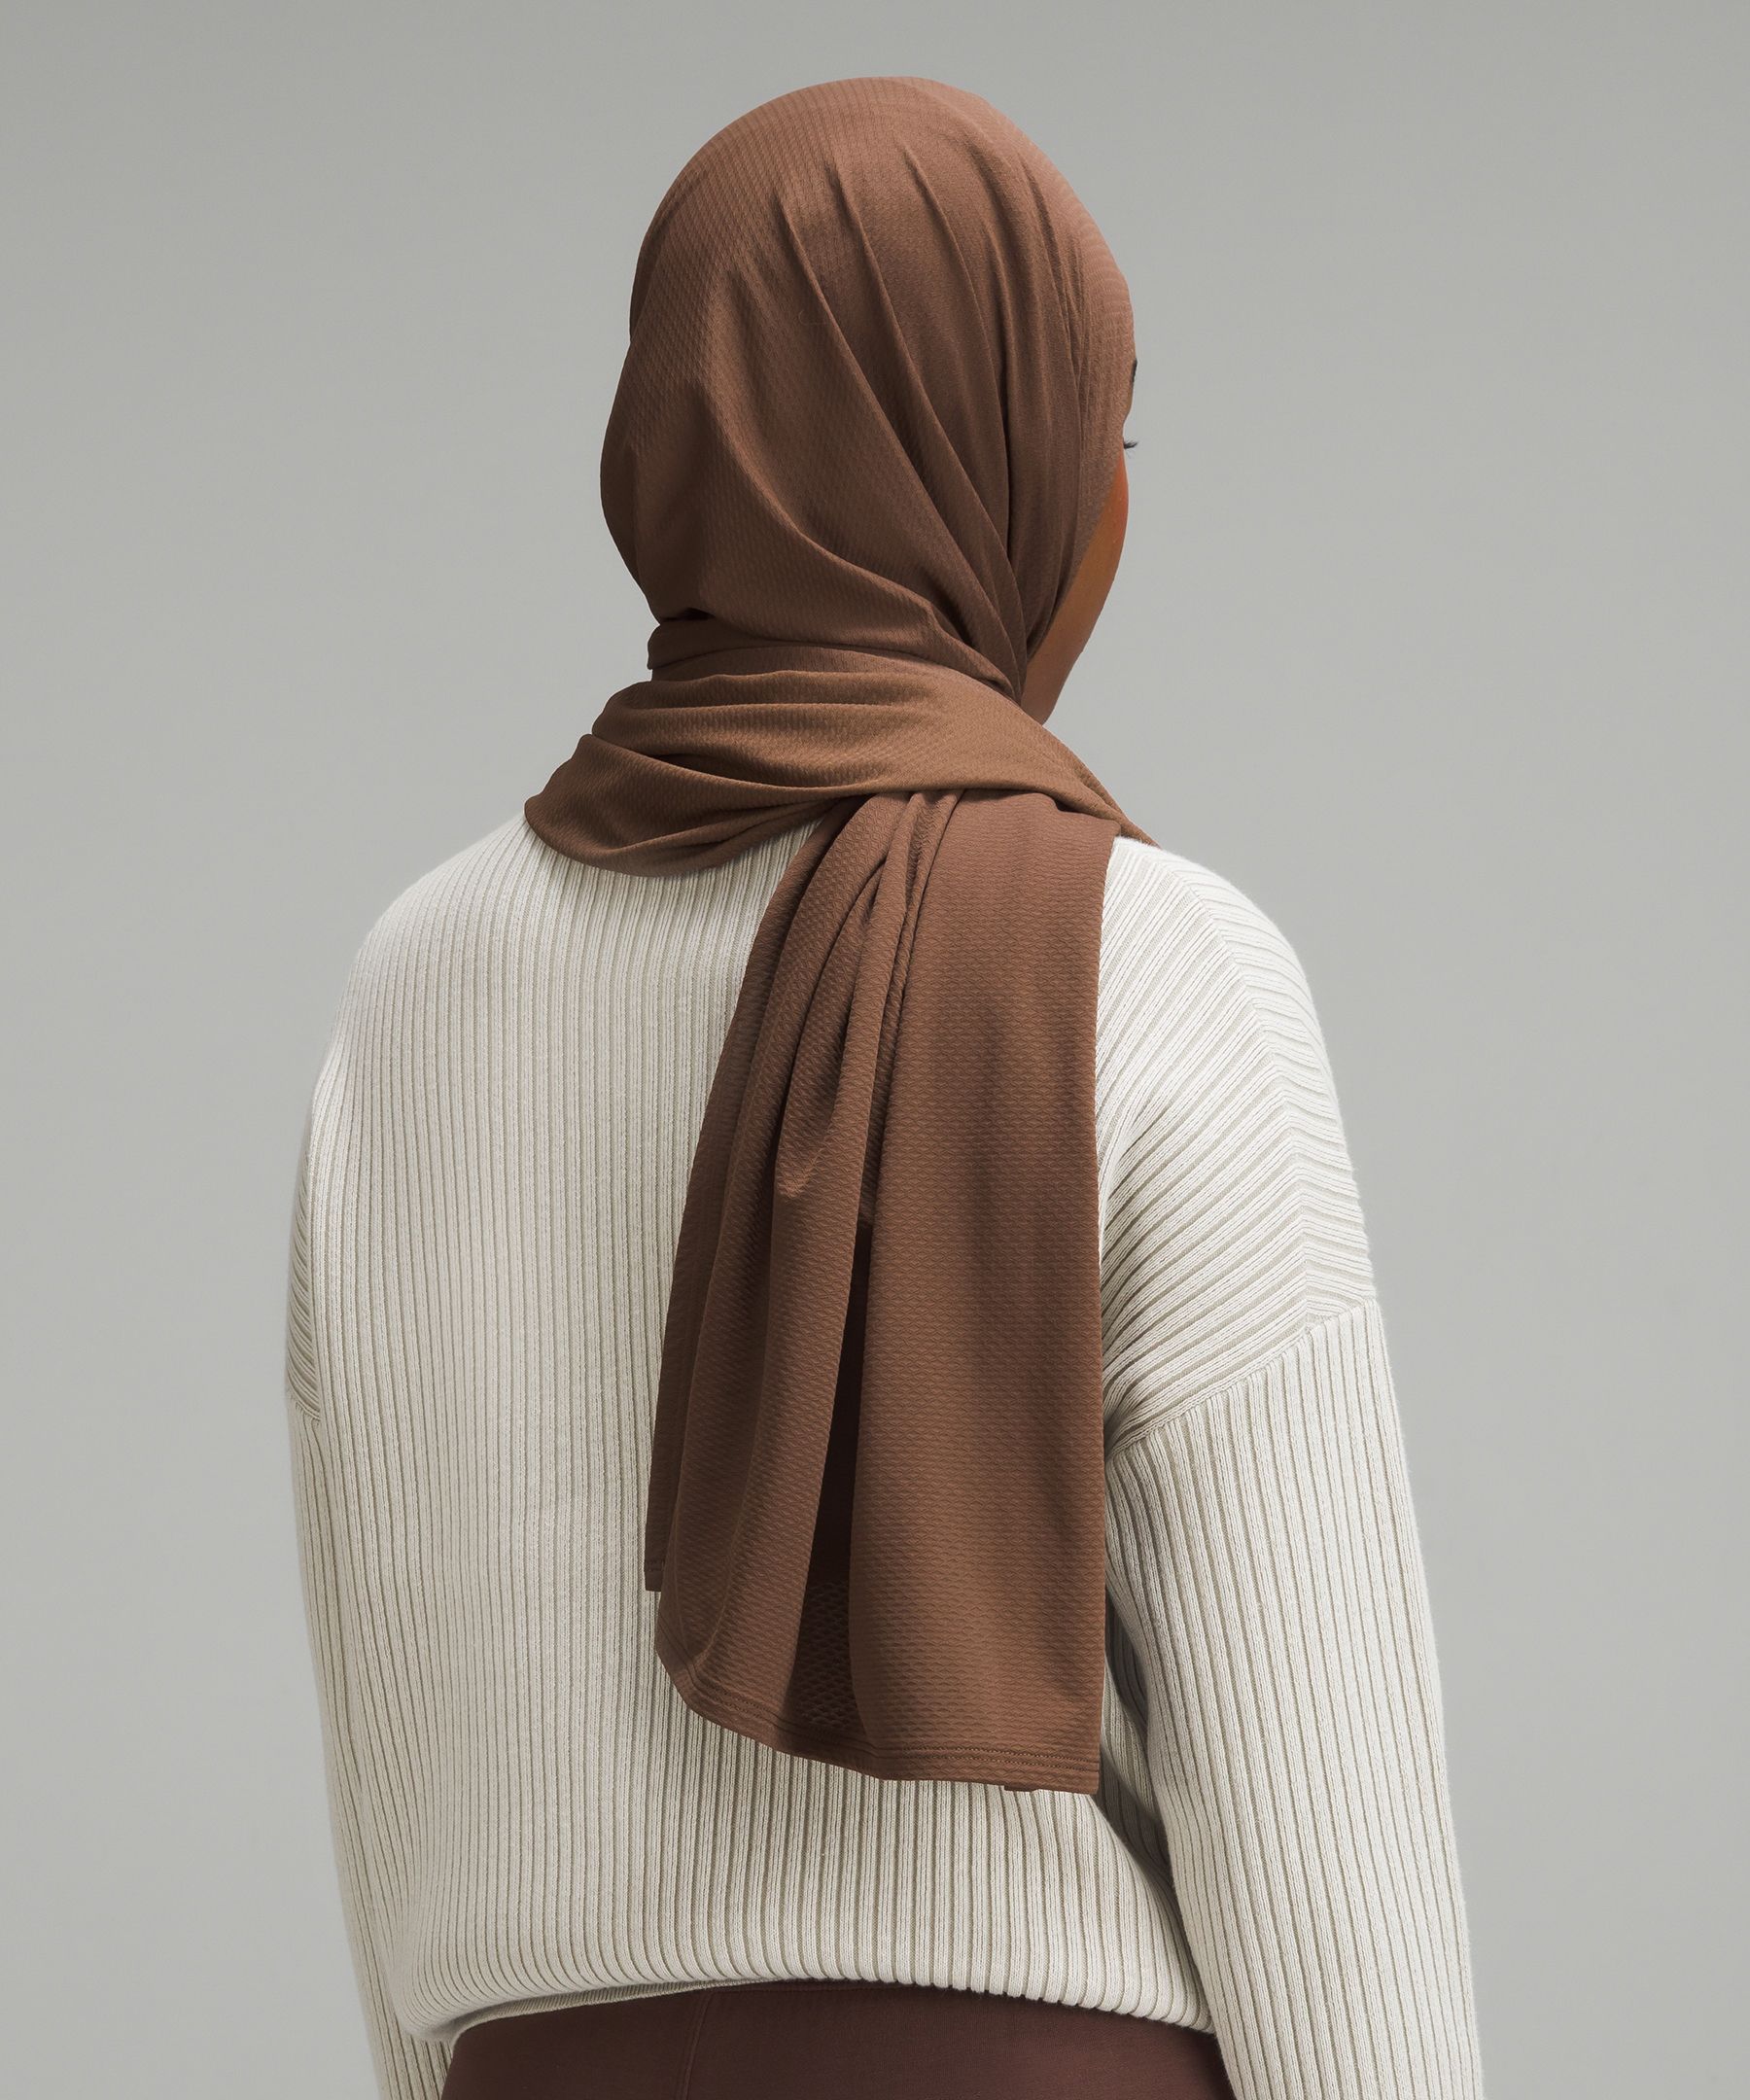 Lululemon Women's Scarf-Style Hijab *Online Only. 4